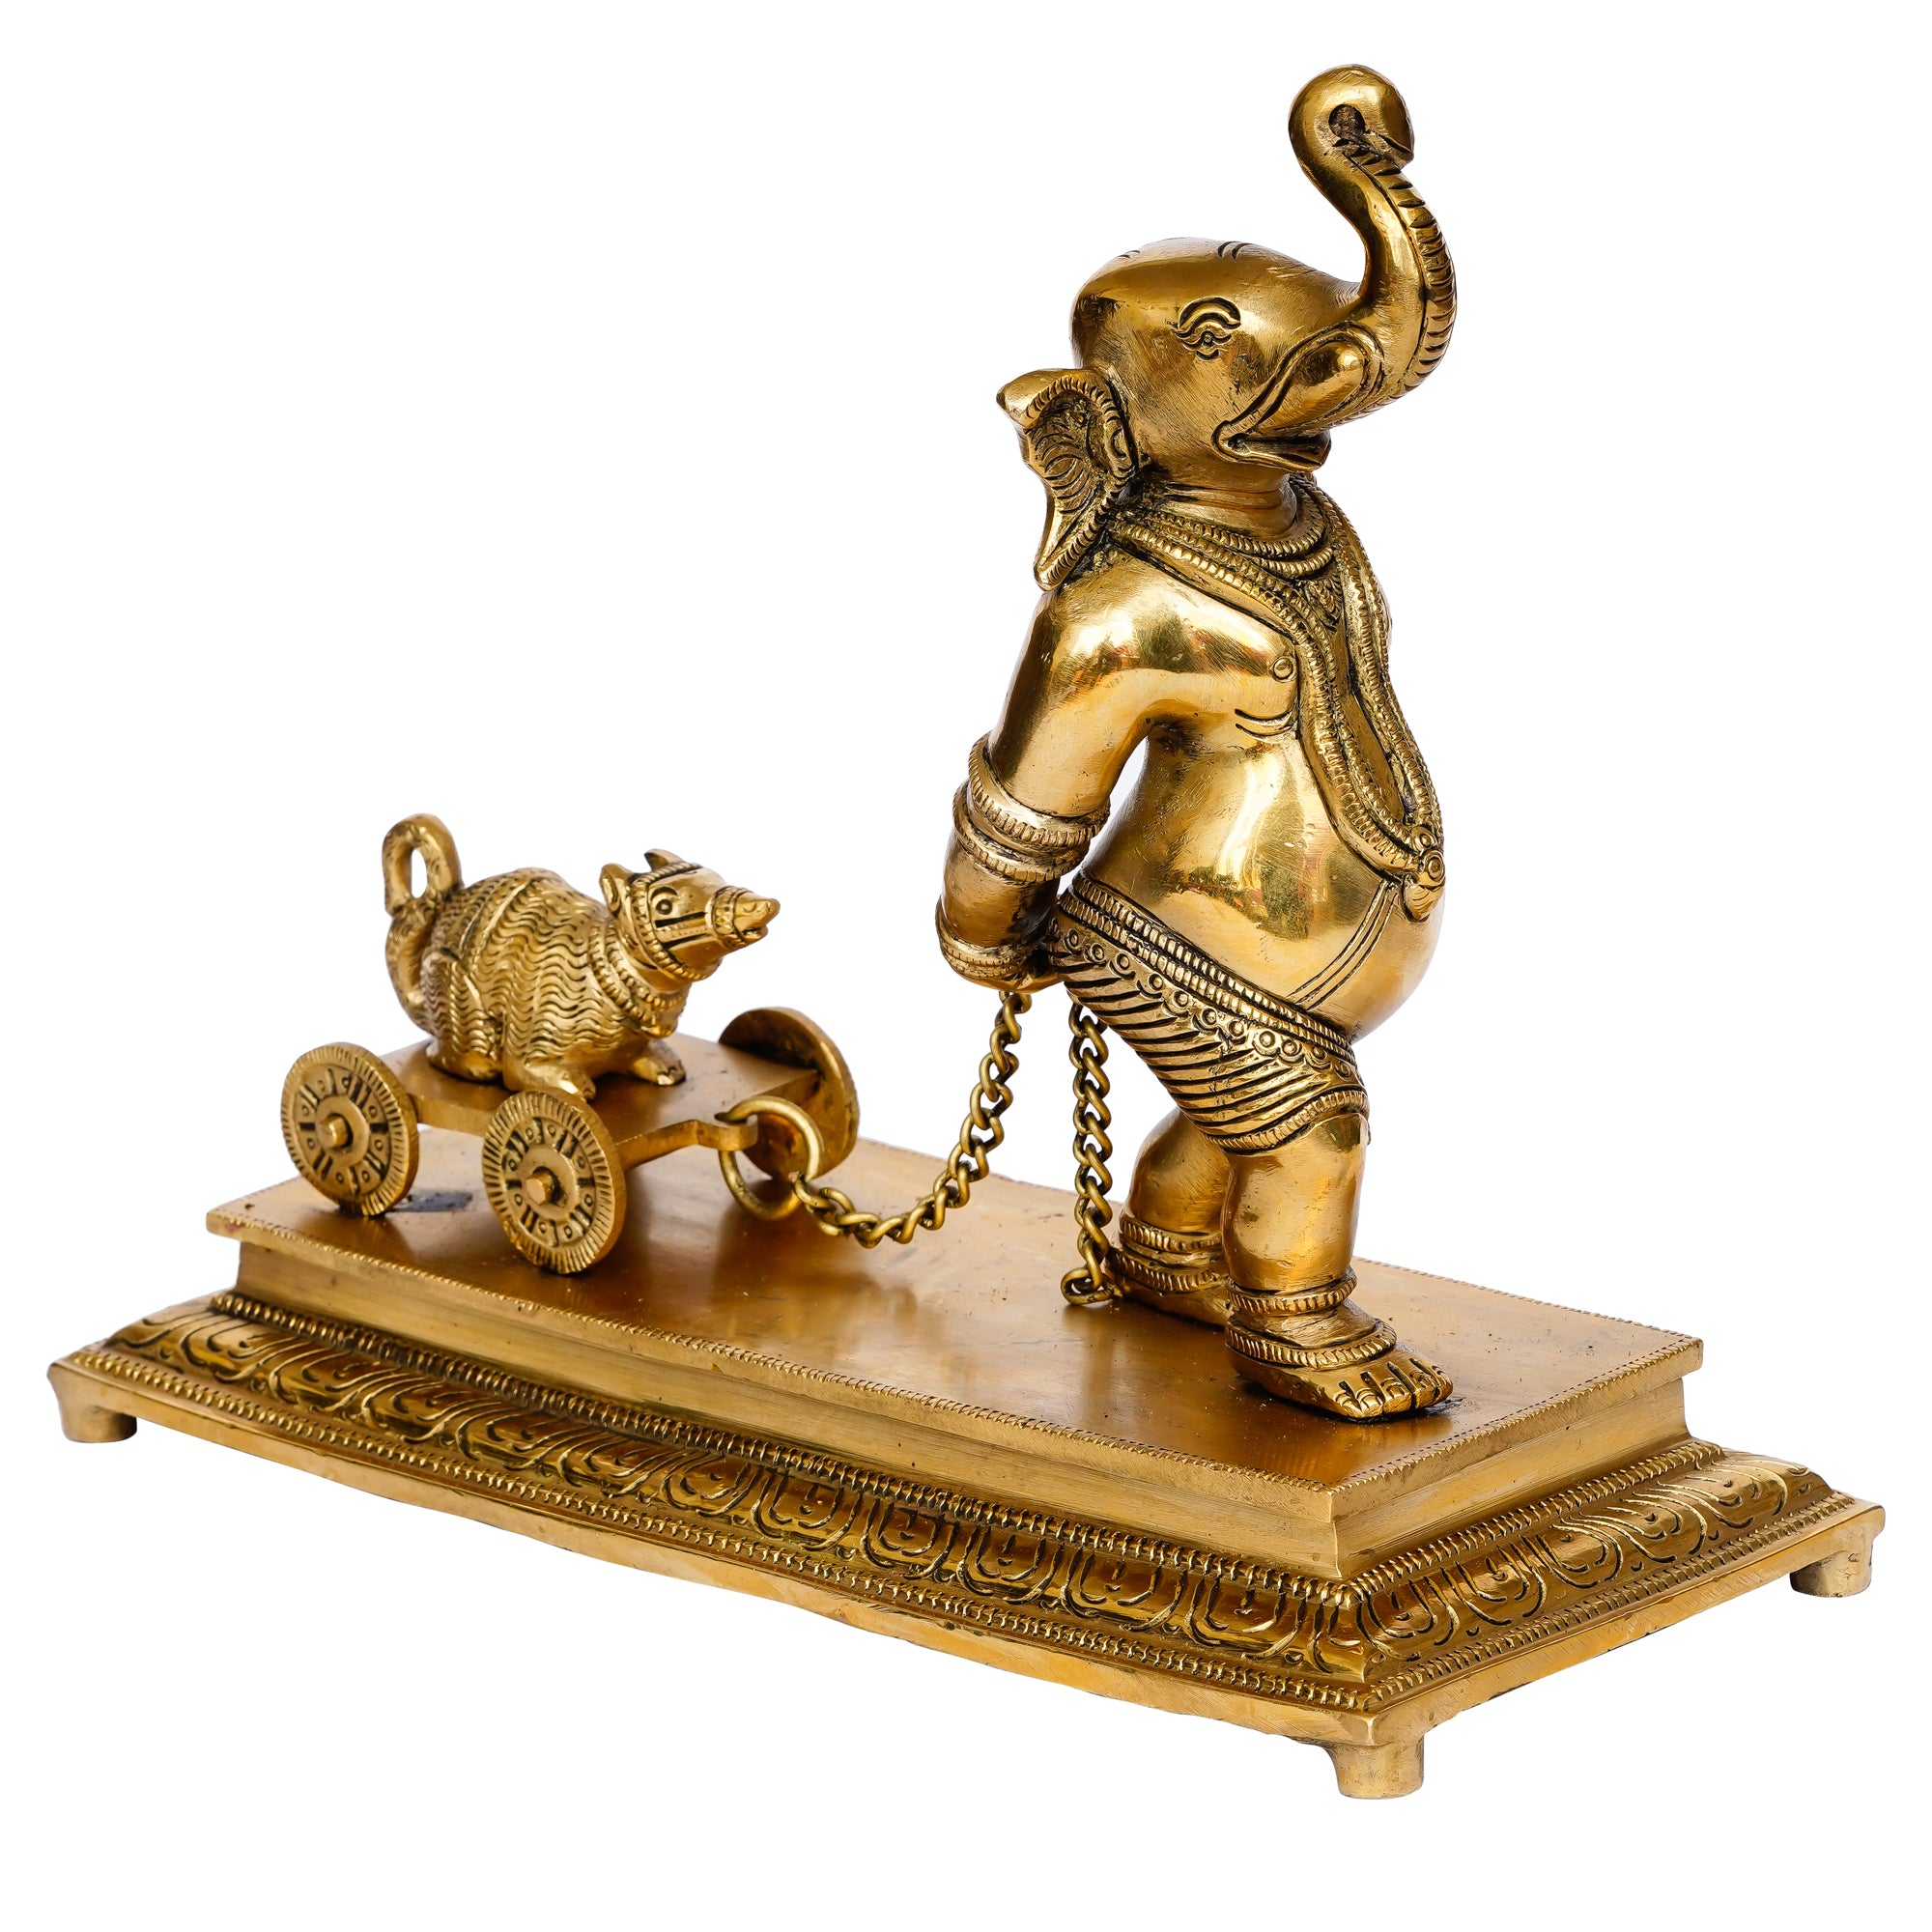 Golden Brass Handcrafted Lord Ganesha Idol Carrying Mushak Cart with Chain 4